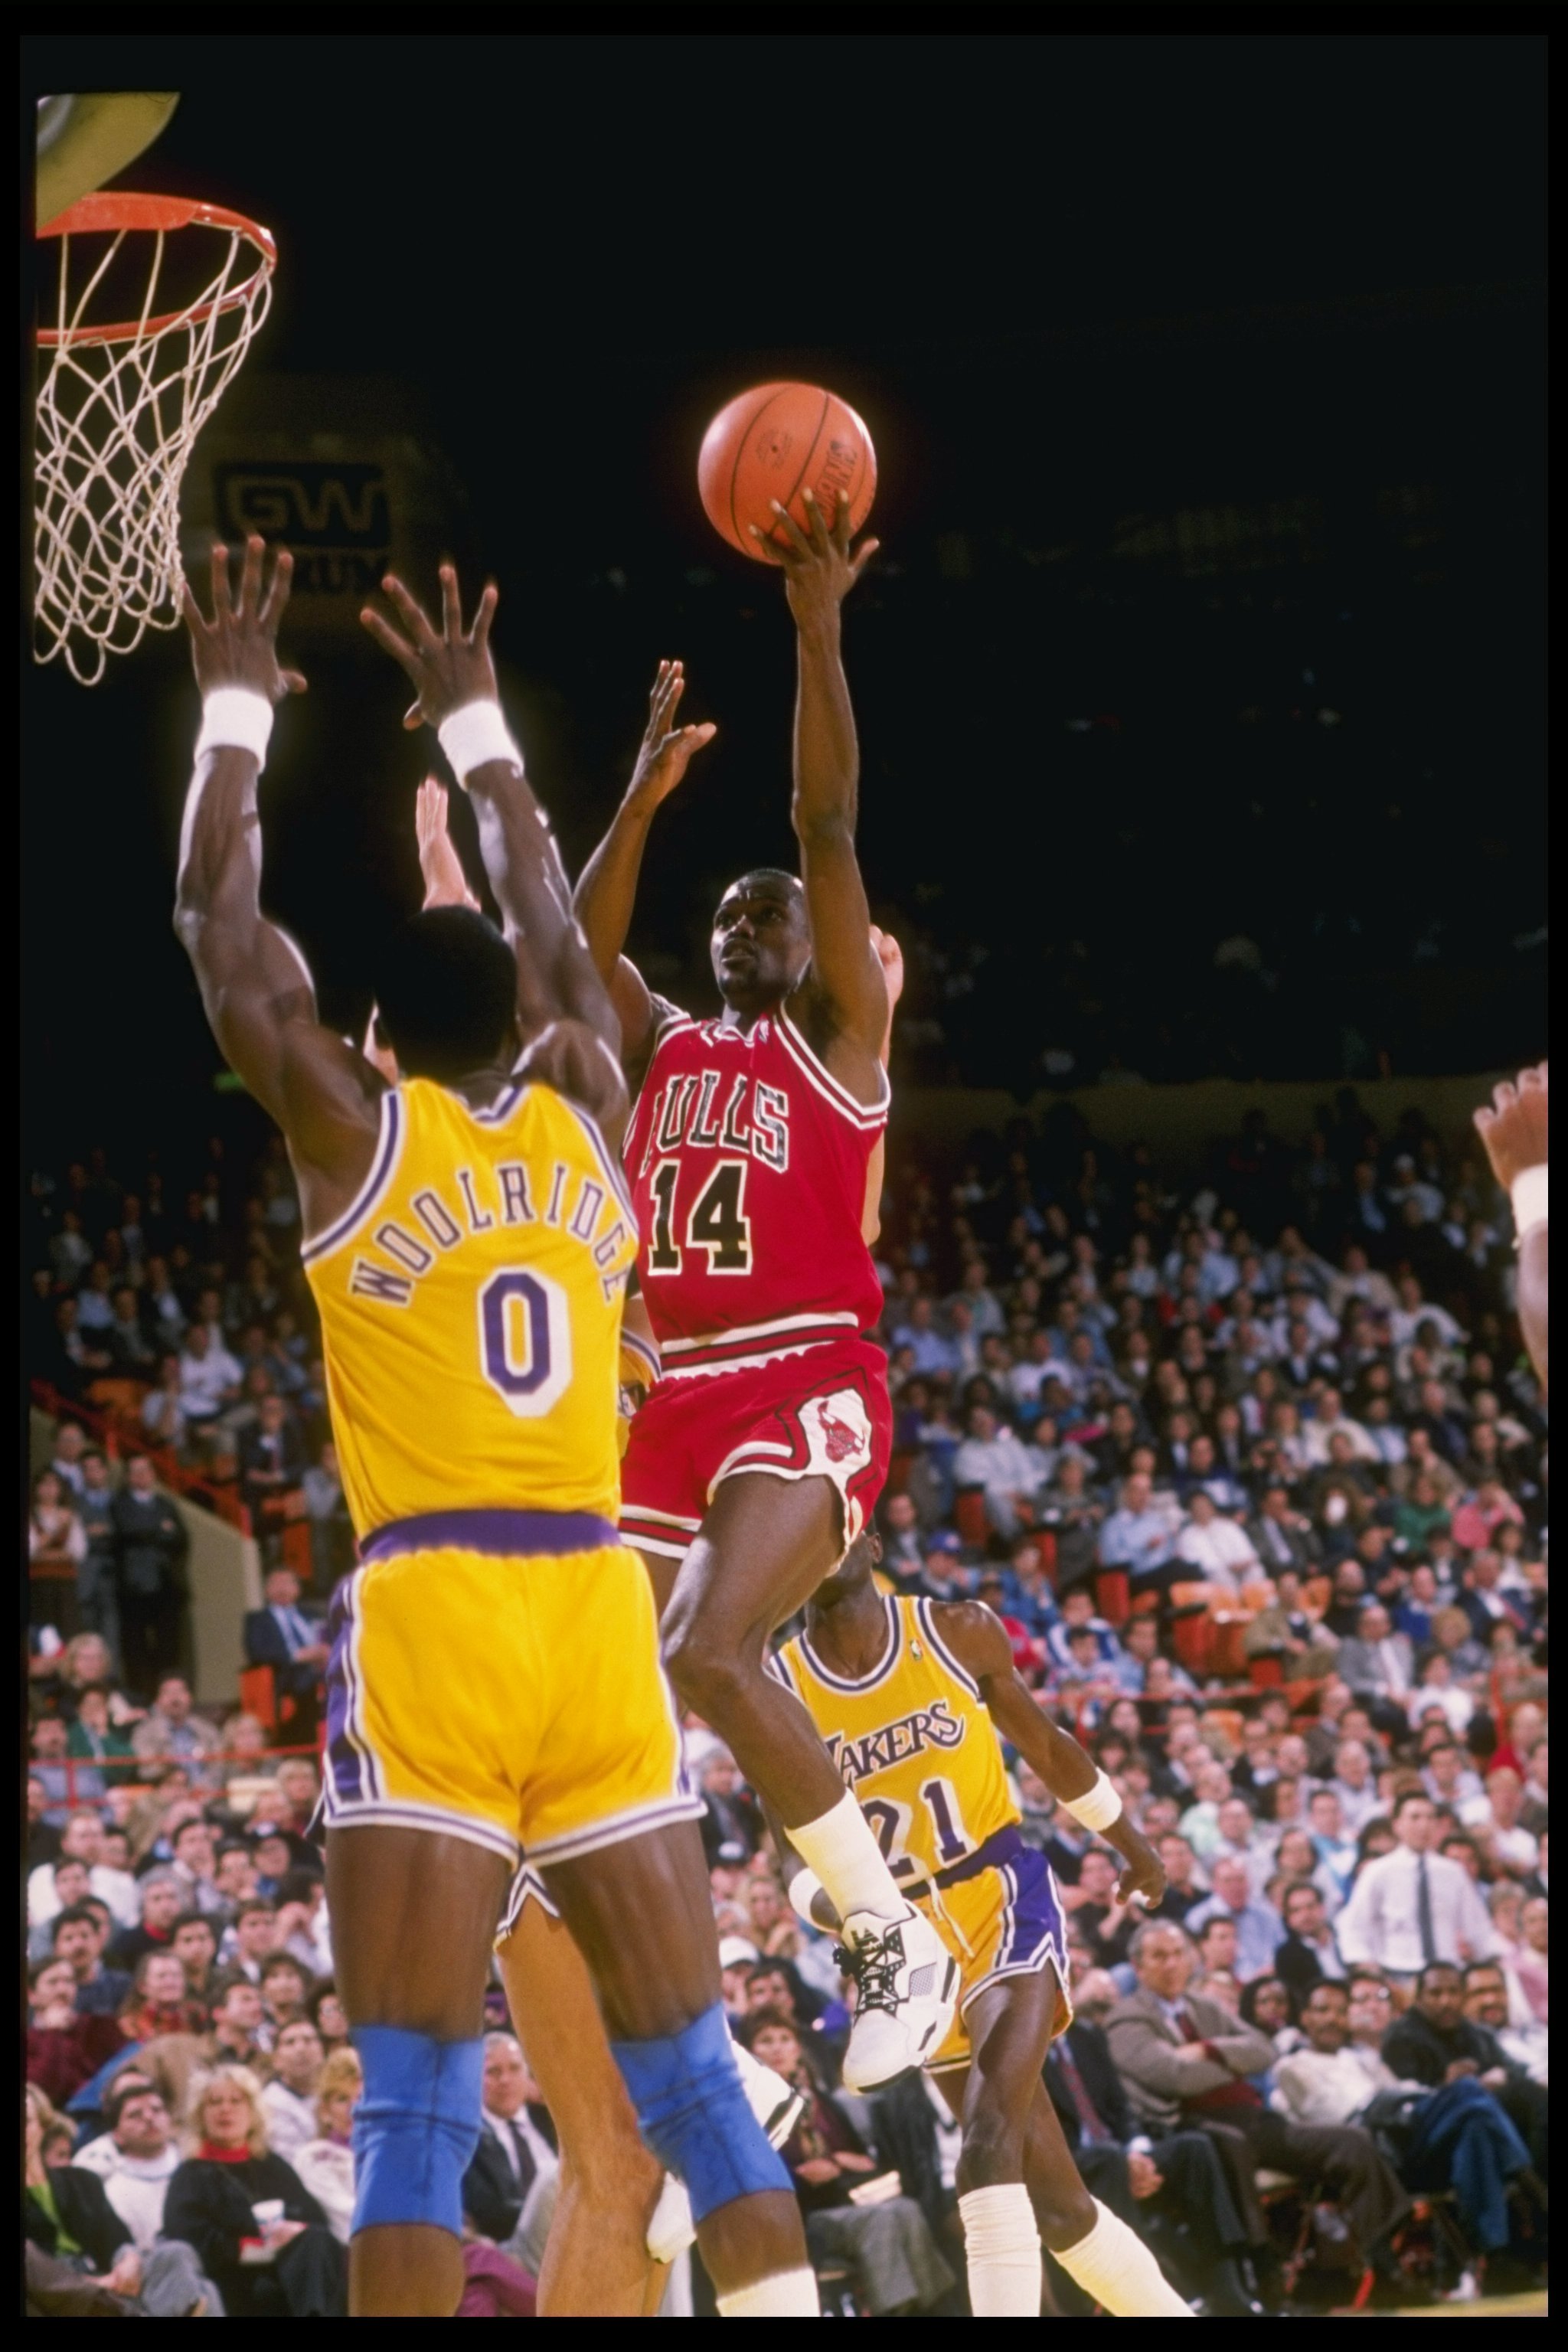 1989-1990:  Guard Craig Hodges of the Chicago Bulls goes up against forward Orlando Woolridge of the Los Angeles Lakers (left) during a game at the Great Western Forum in Inglewood, California. Mandatory Credit: Stephen Dunn  /Allsport